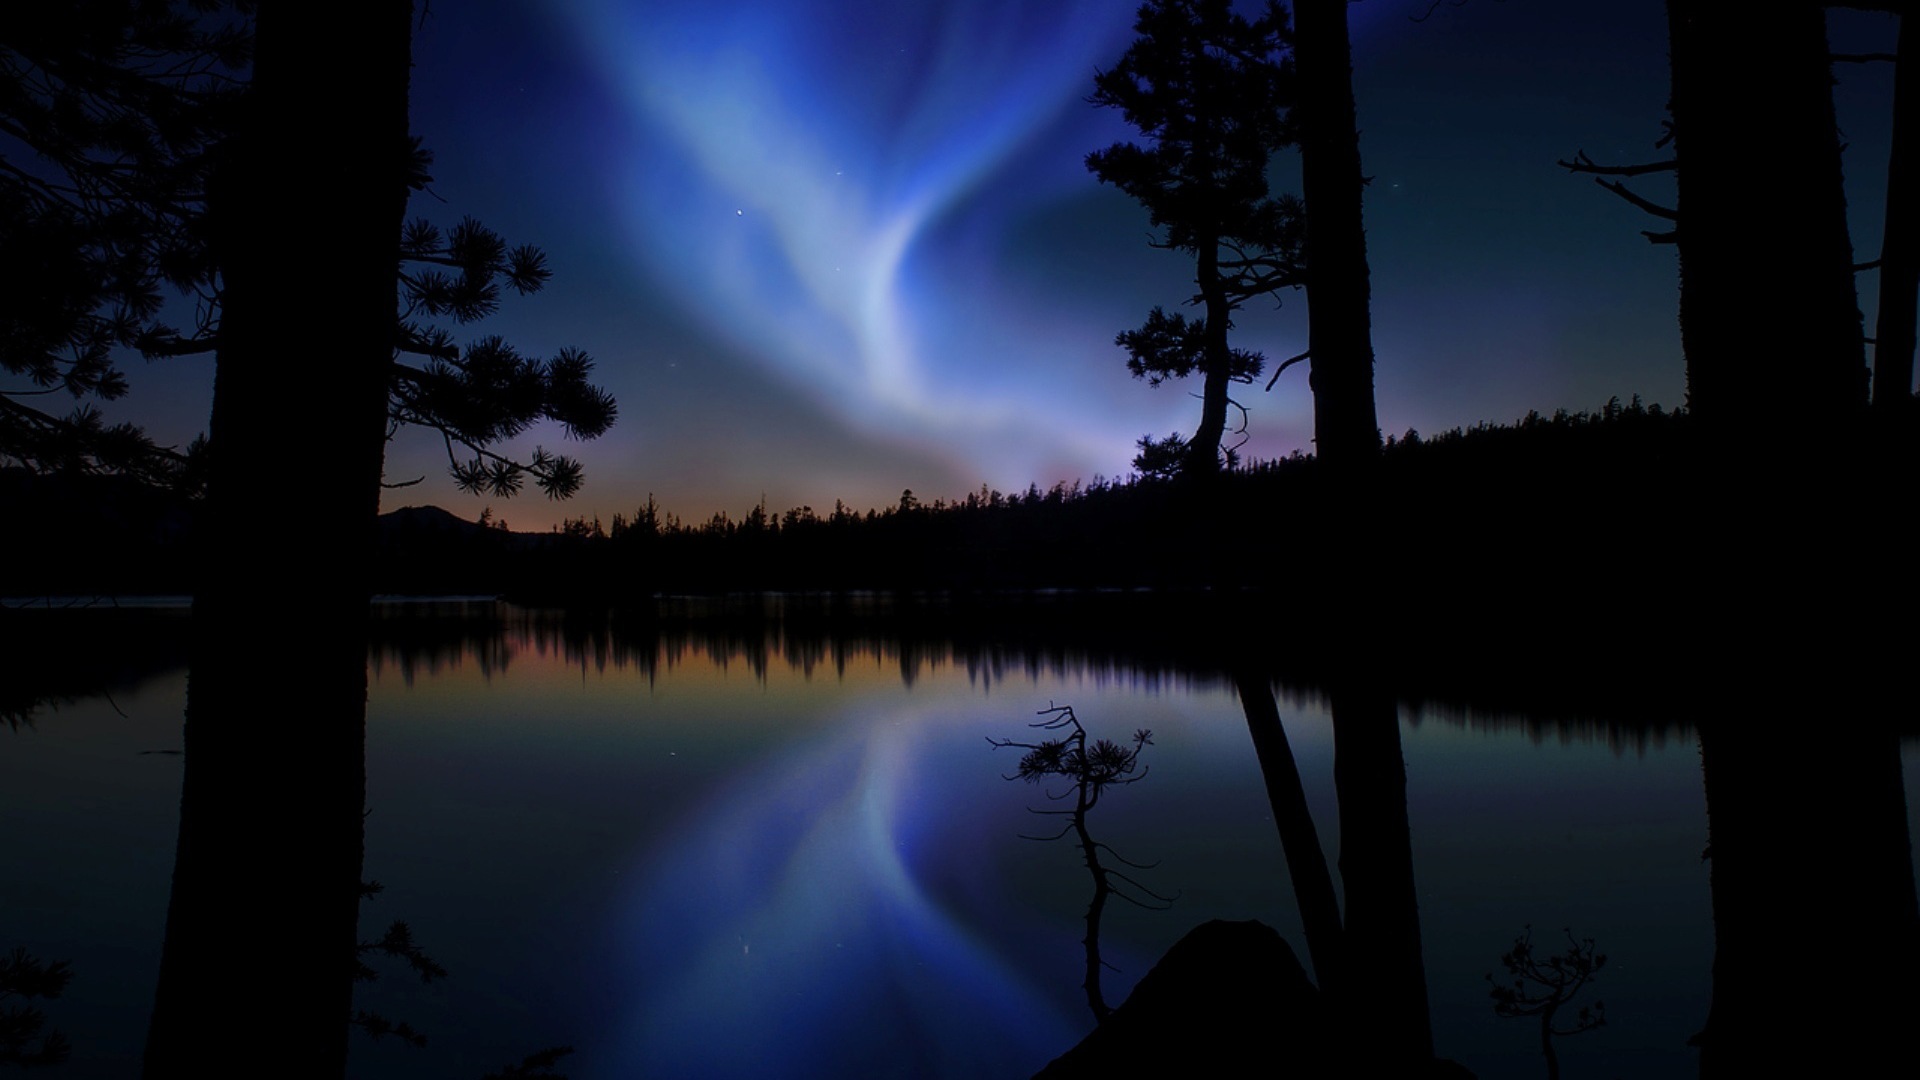 Natural wonders of the Northern Lights HD Wallpaper (1) #11 - 1920x1080